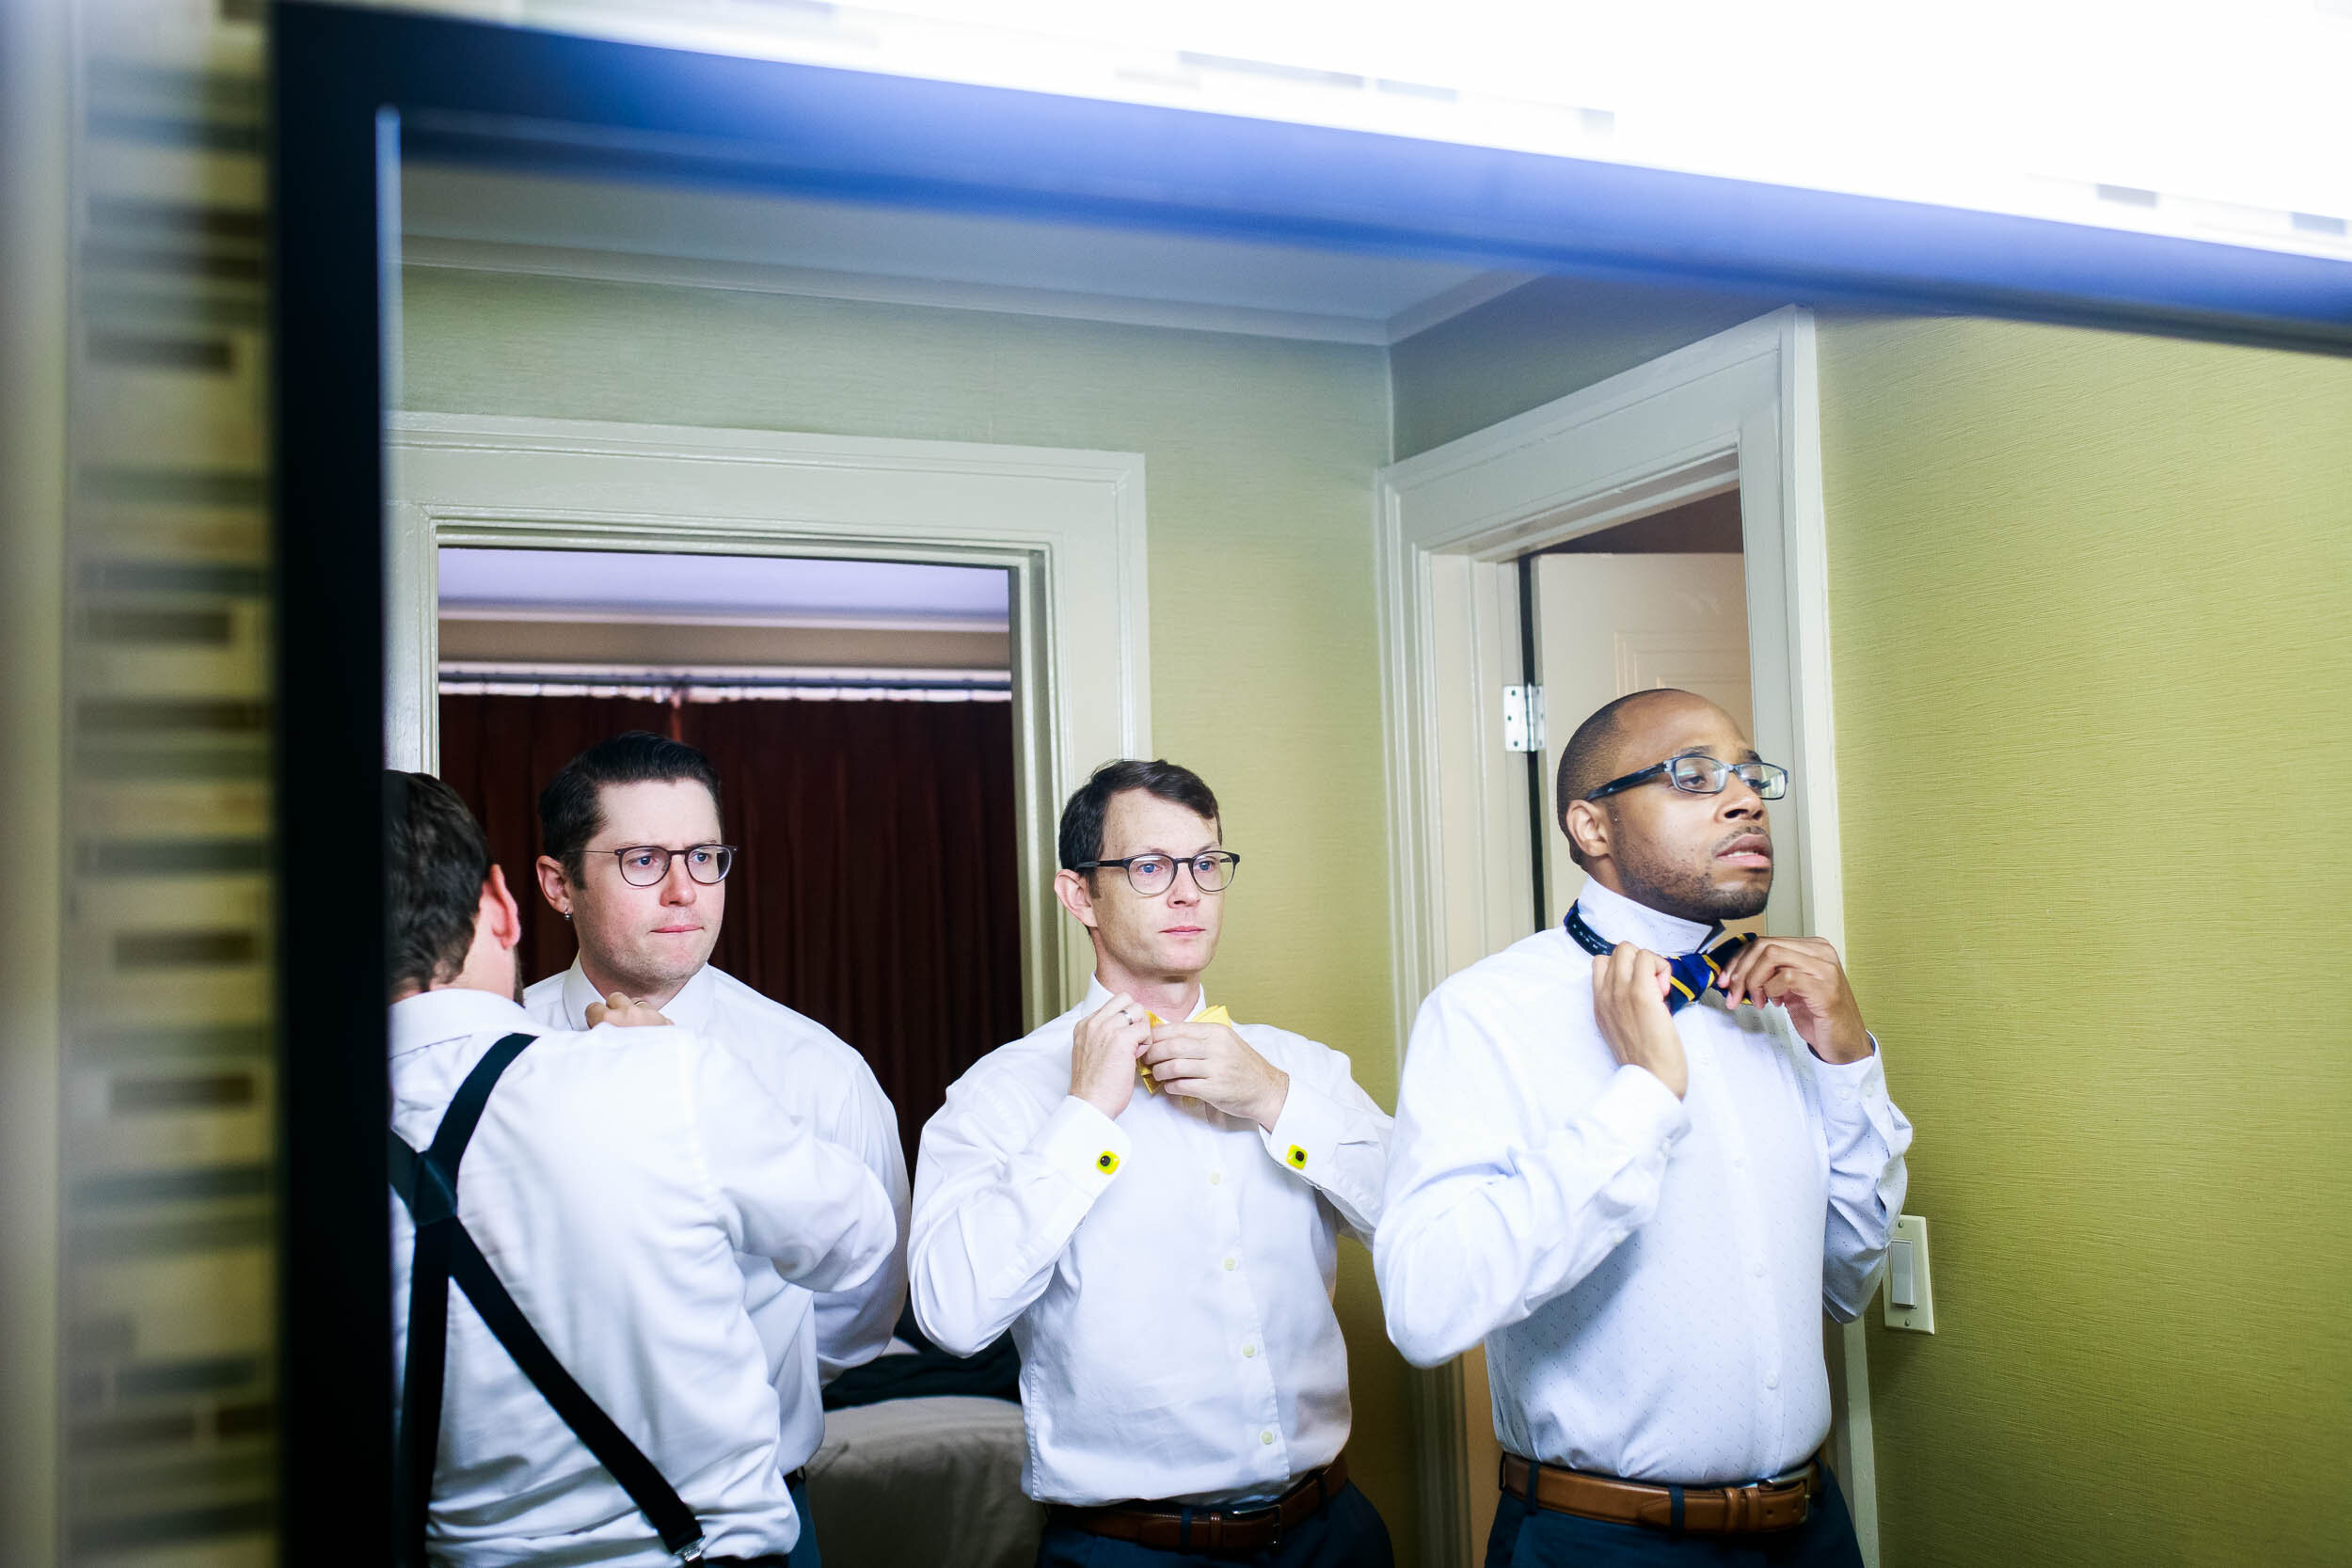 Groomsmen getting ready photo: Columbus Park Refectory wedding captured by J. Brown Photography.